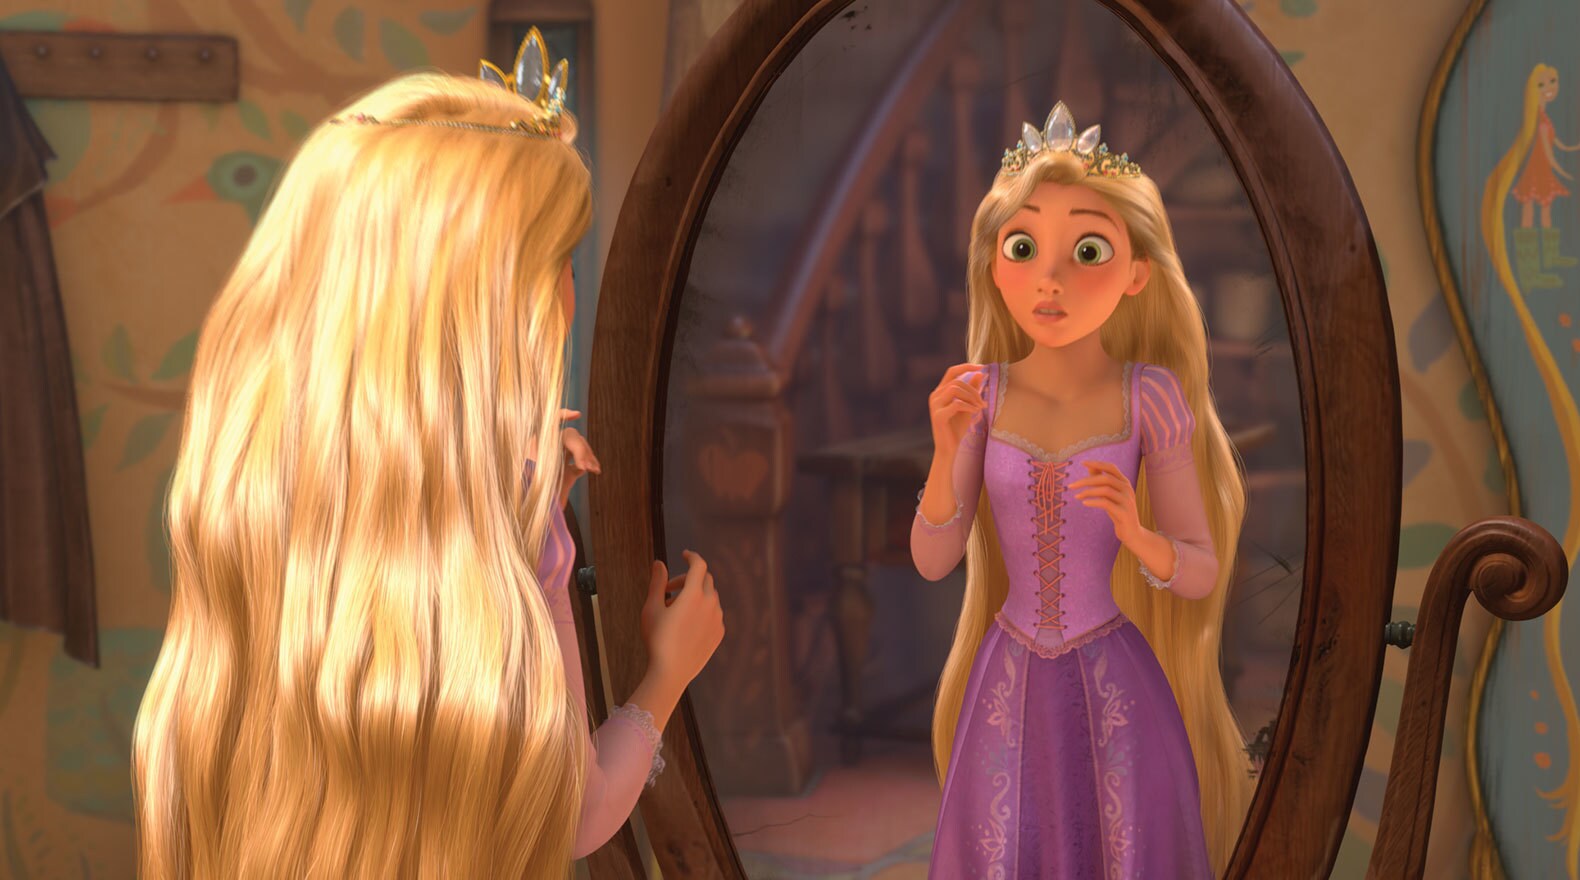 Rapunzel discovers that sometimes your destiny finds you.